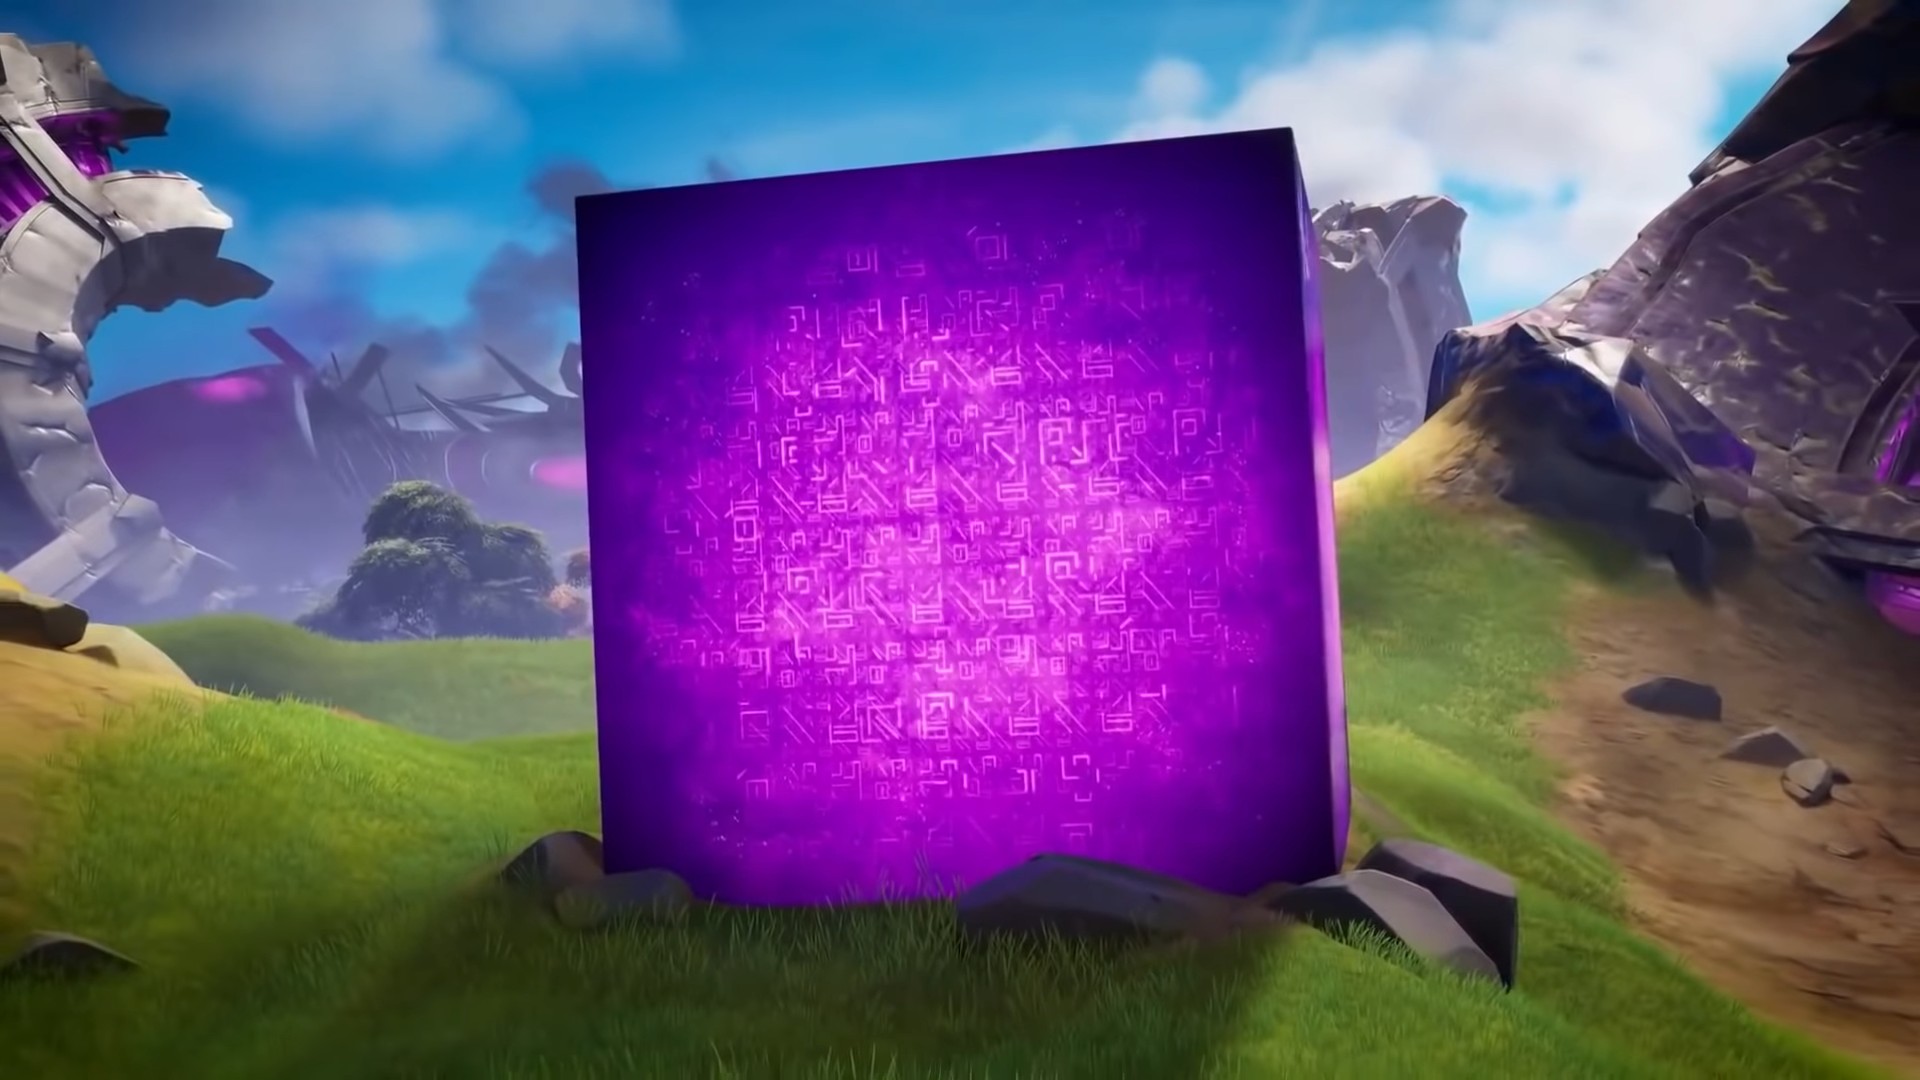 Fortnite season 8 patch notes: Kevin the cube, Carnage, battle pass, and more